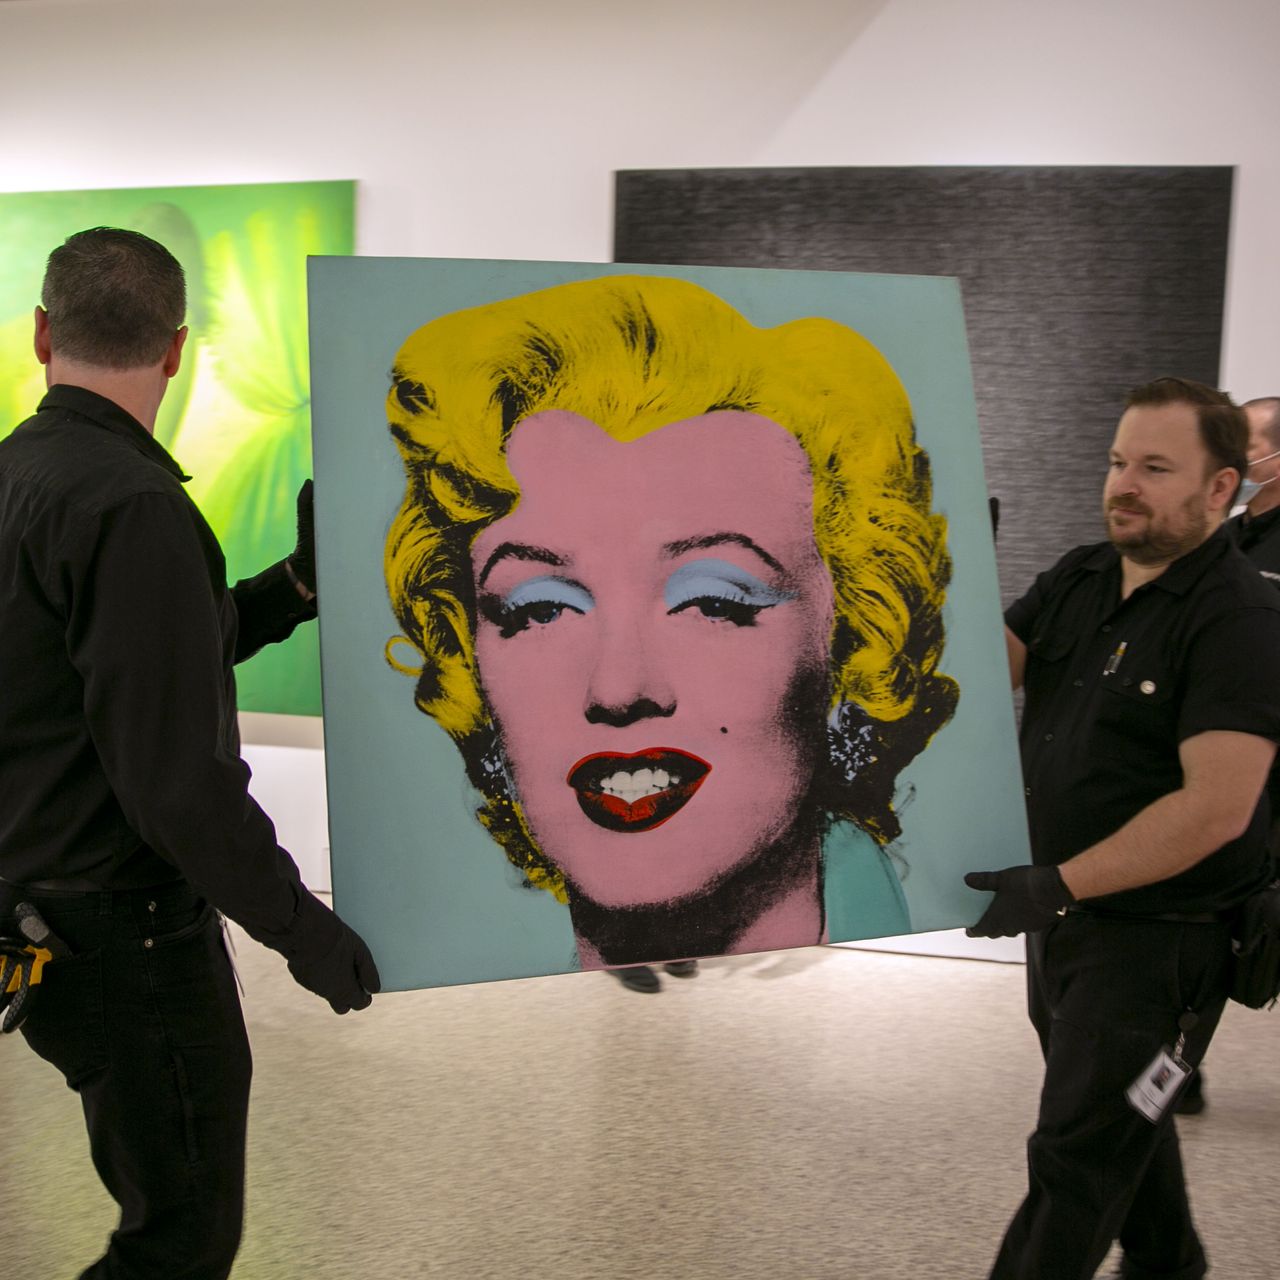 Andy Warhol’s iconic Marilyn Monroe portrait  Sells For $195 million at auction